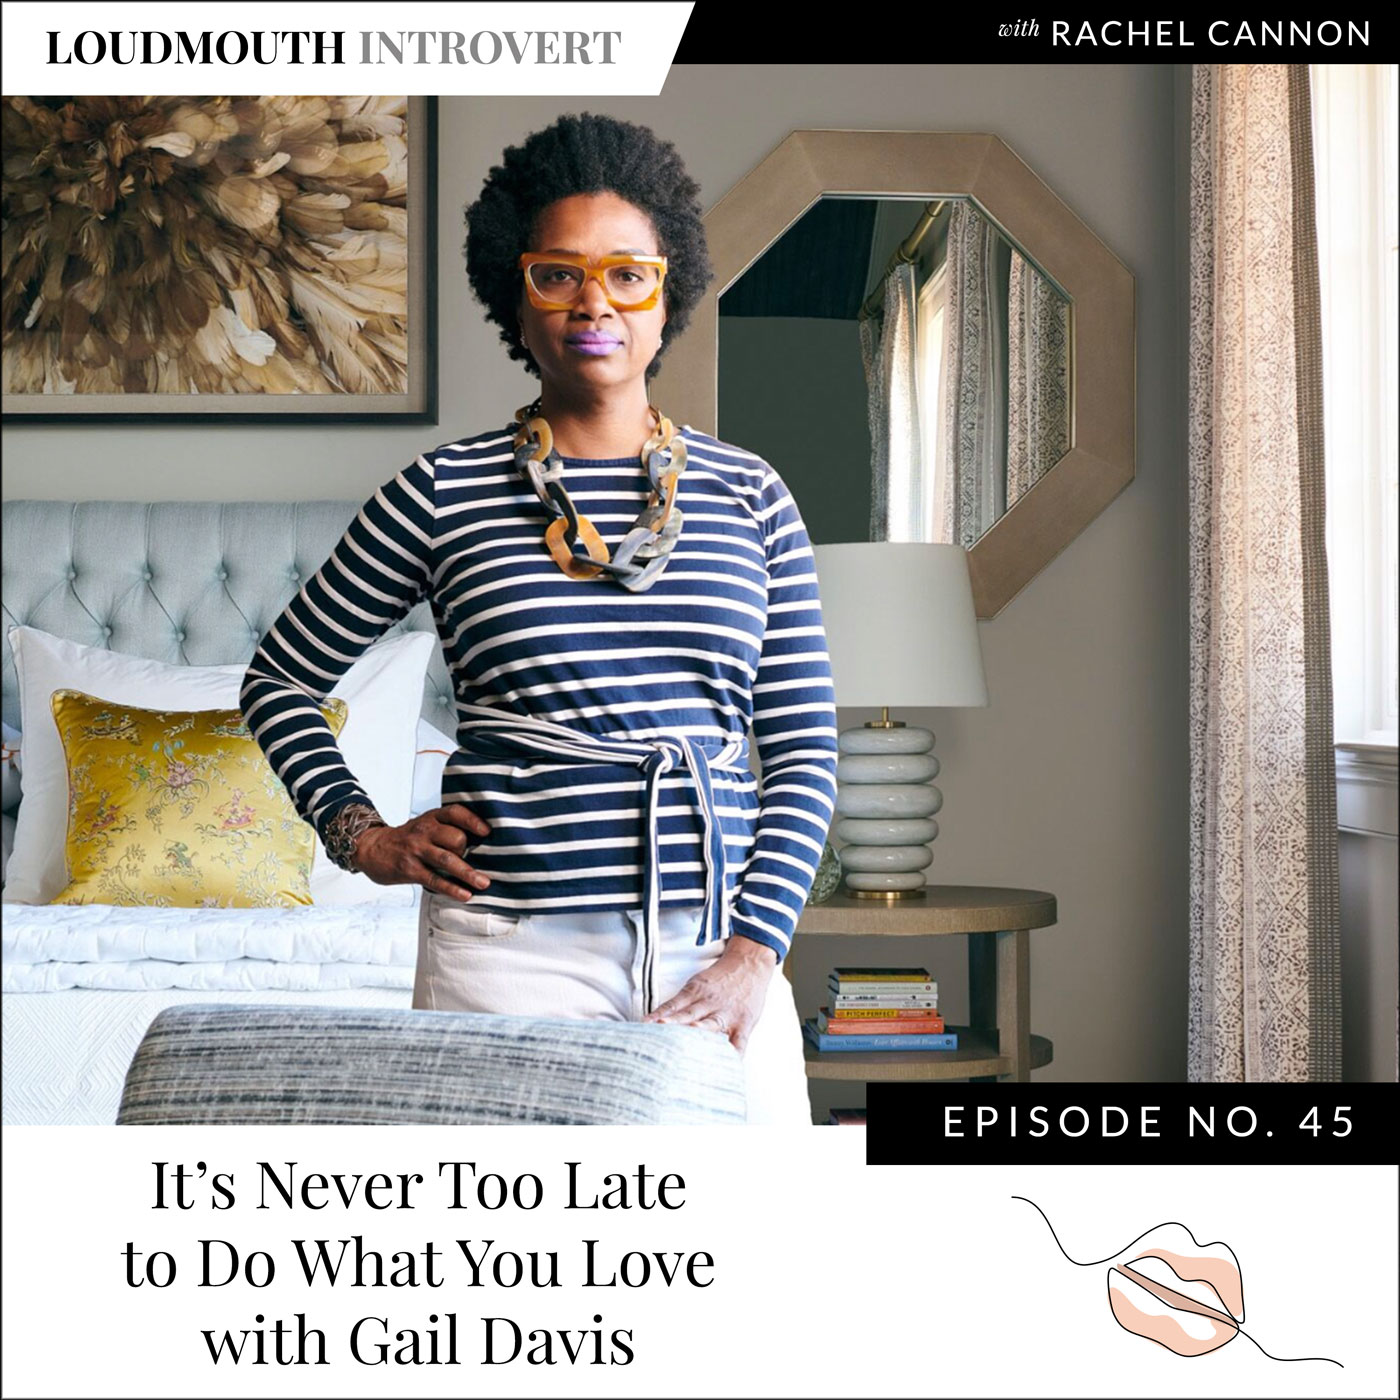 It’s Never Too Late to Do What You Love with Gail Davis